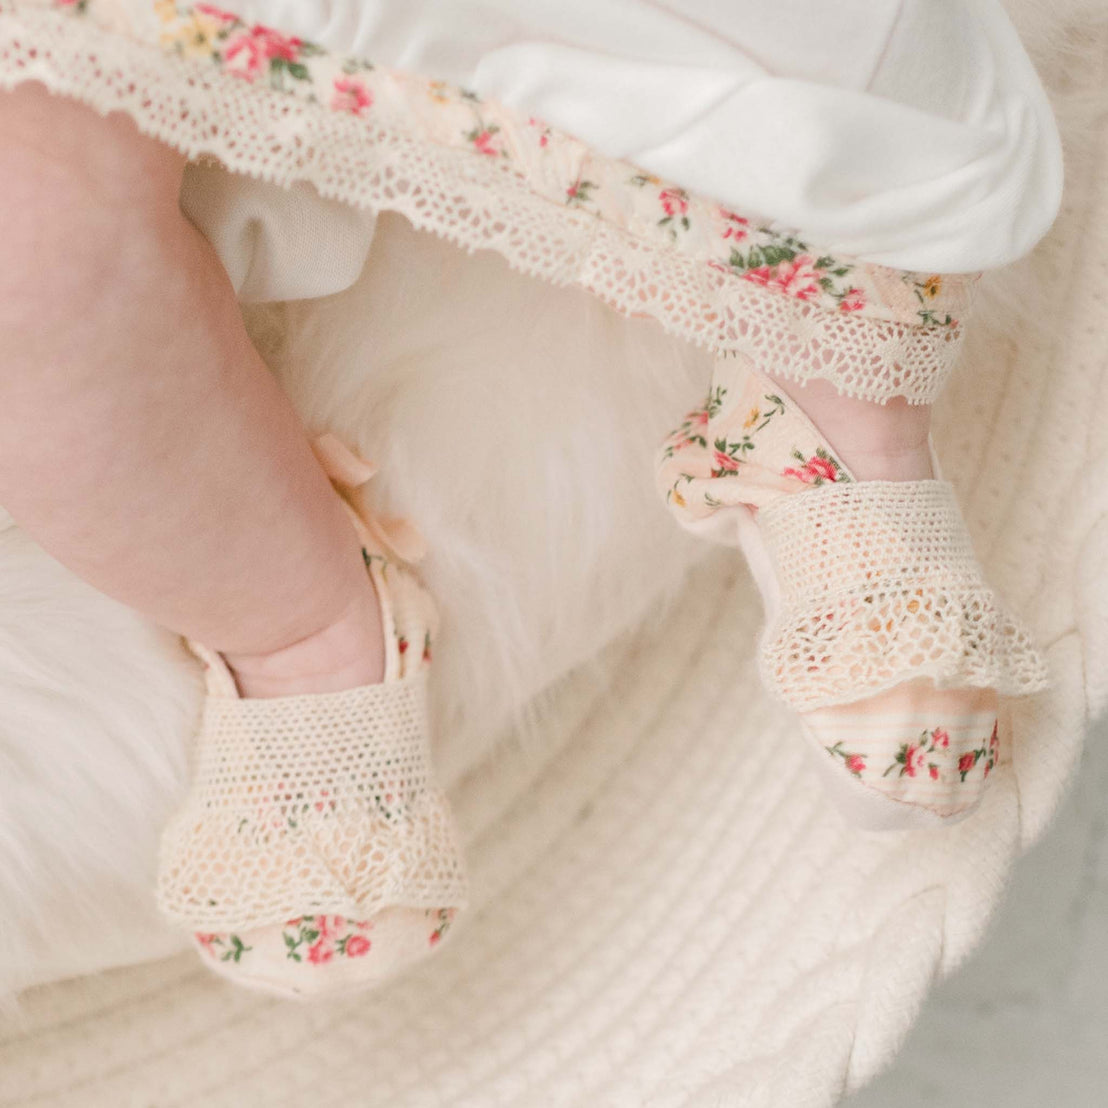 Closer detail of the "Blush" Eloise Booties made with the matching Eloise floral striped material and showcasing the natural color lace across the toe and a coordinating cotton ribbon bow on the heel.